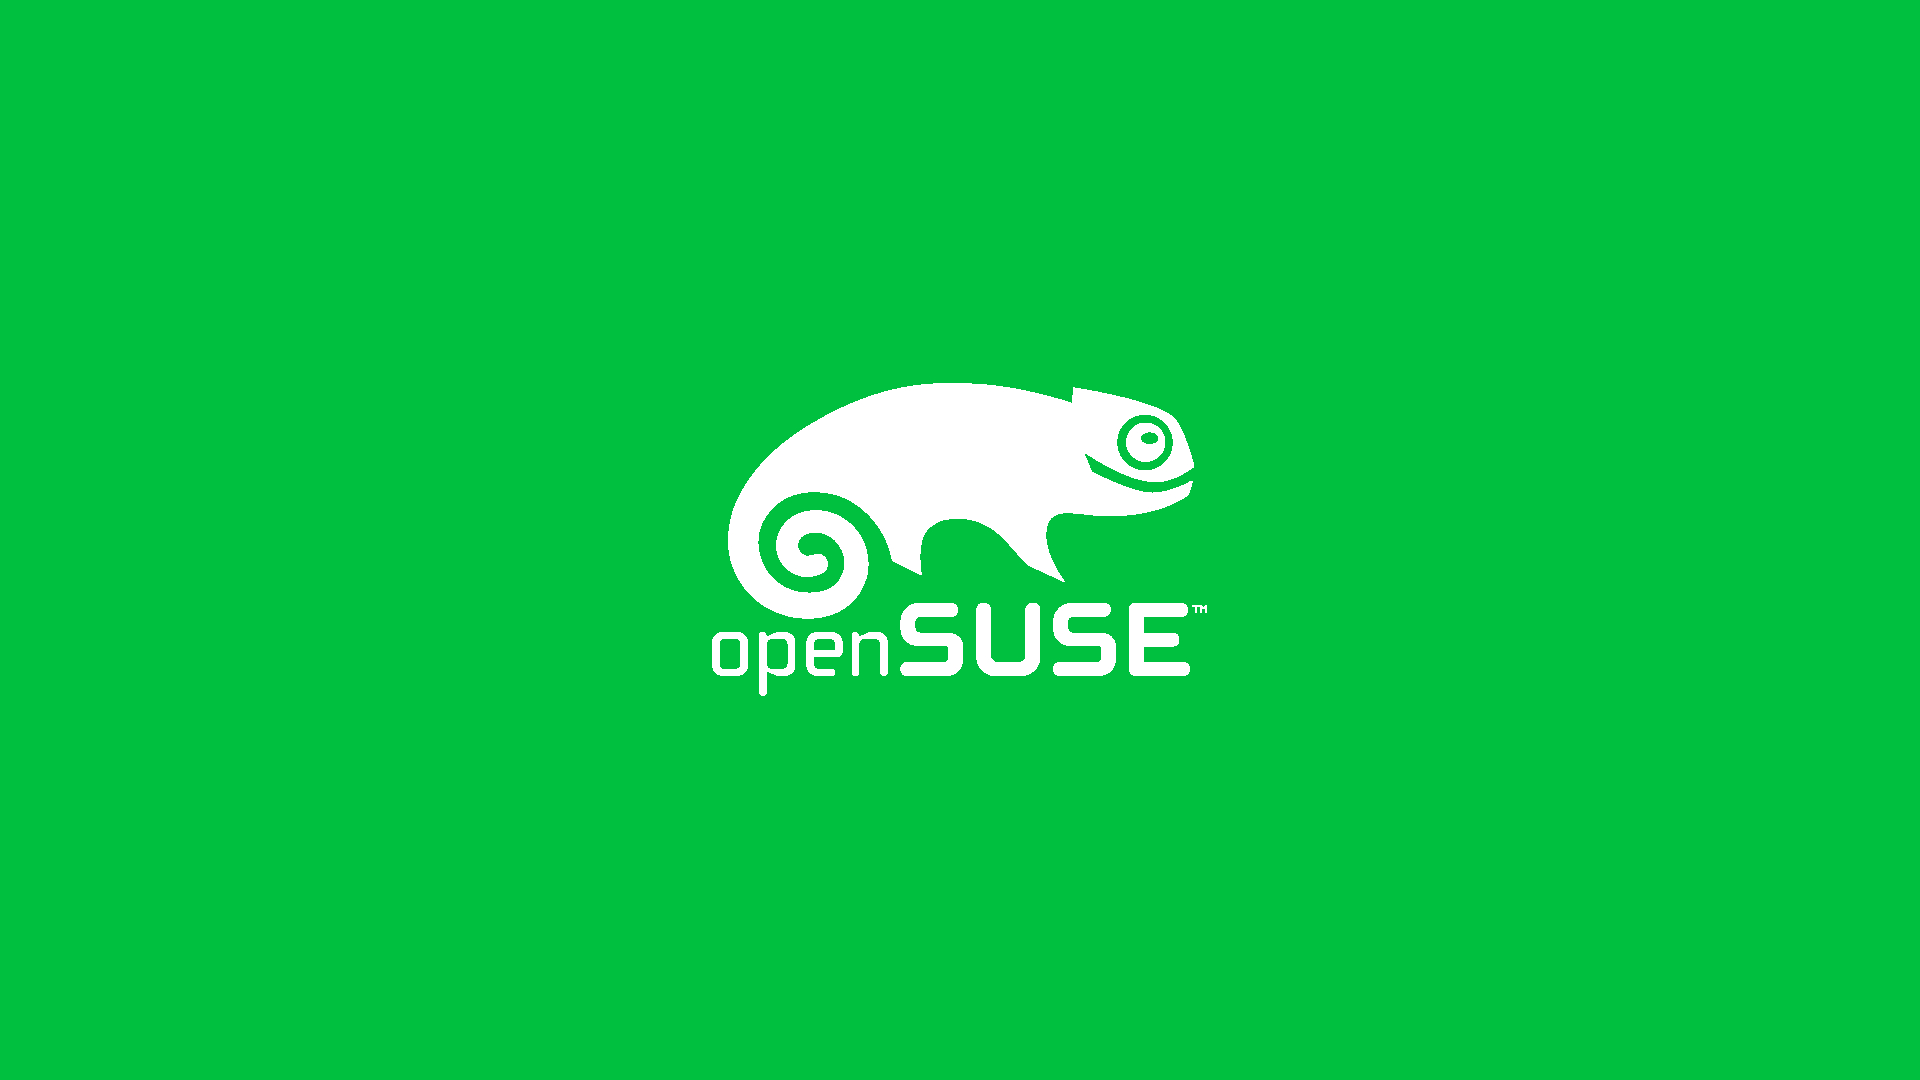 1920x1080 Chameleon: Plymouth theme for openSUSE KDE Store